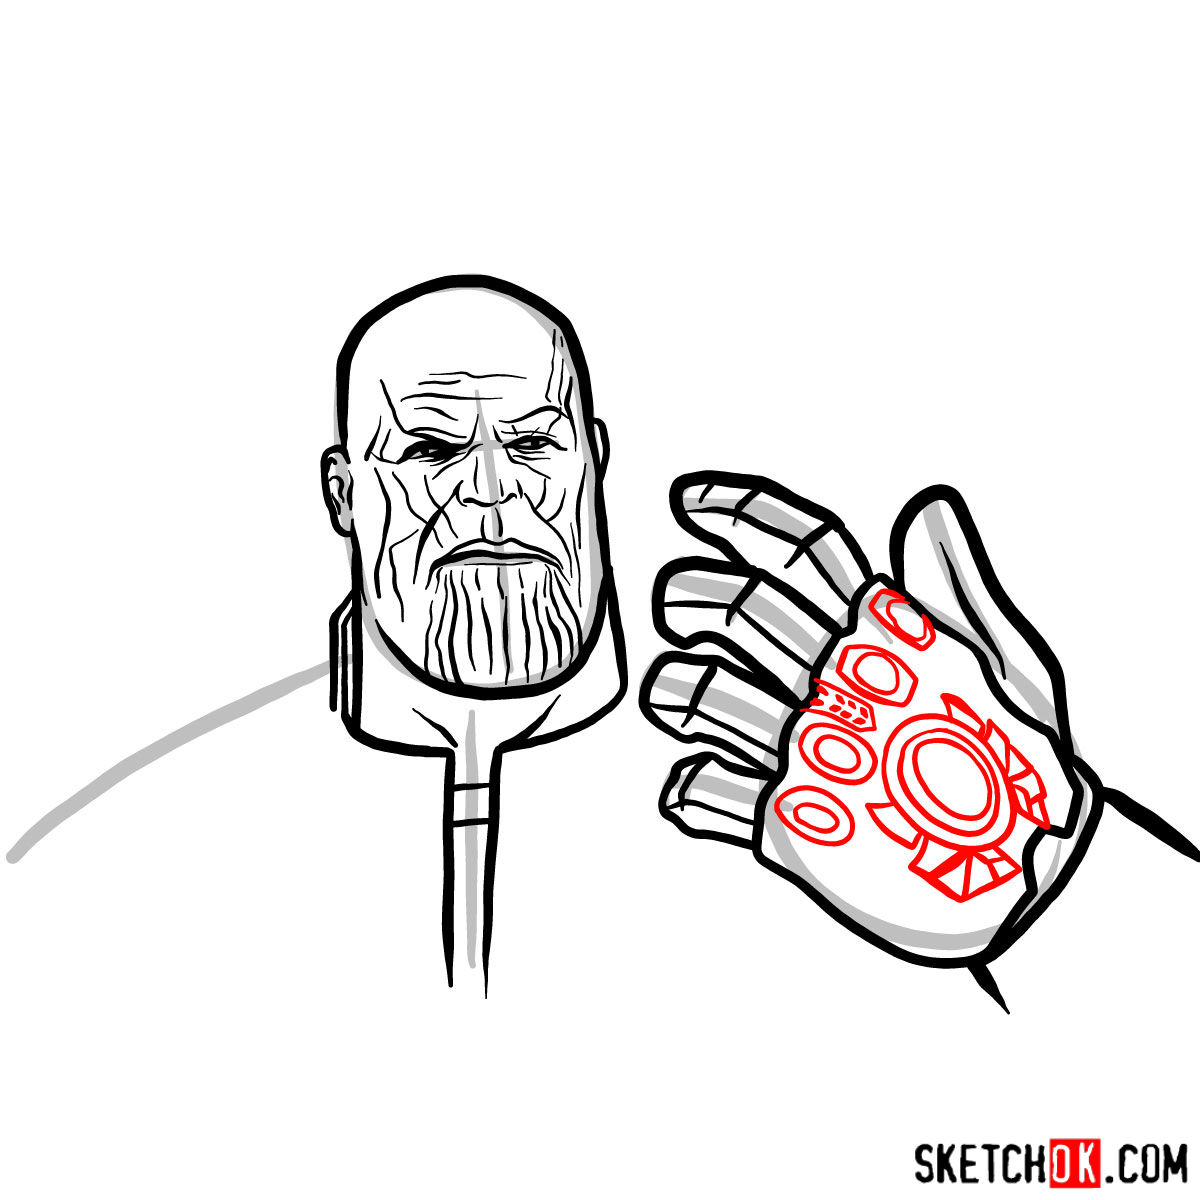 How to draw Thanos from the Avengers: Infinity War 2018 film - step 12